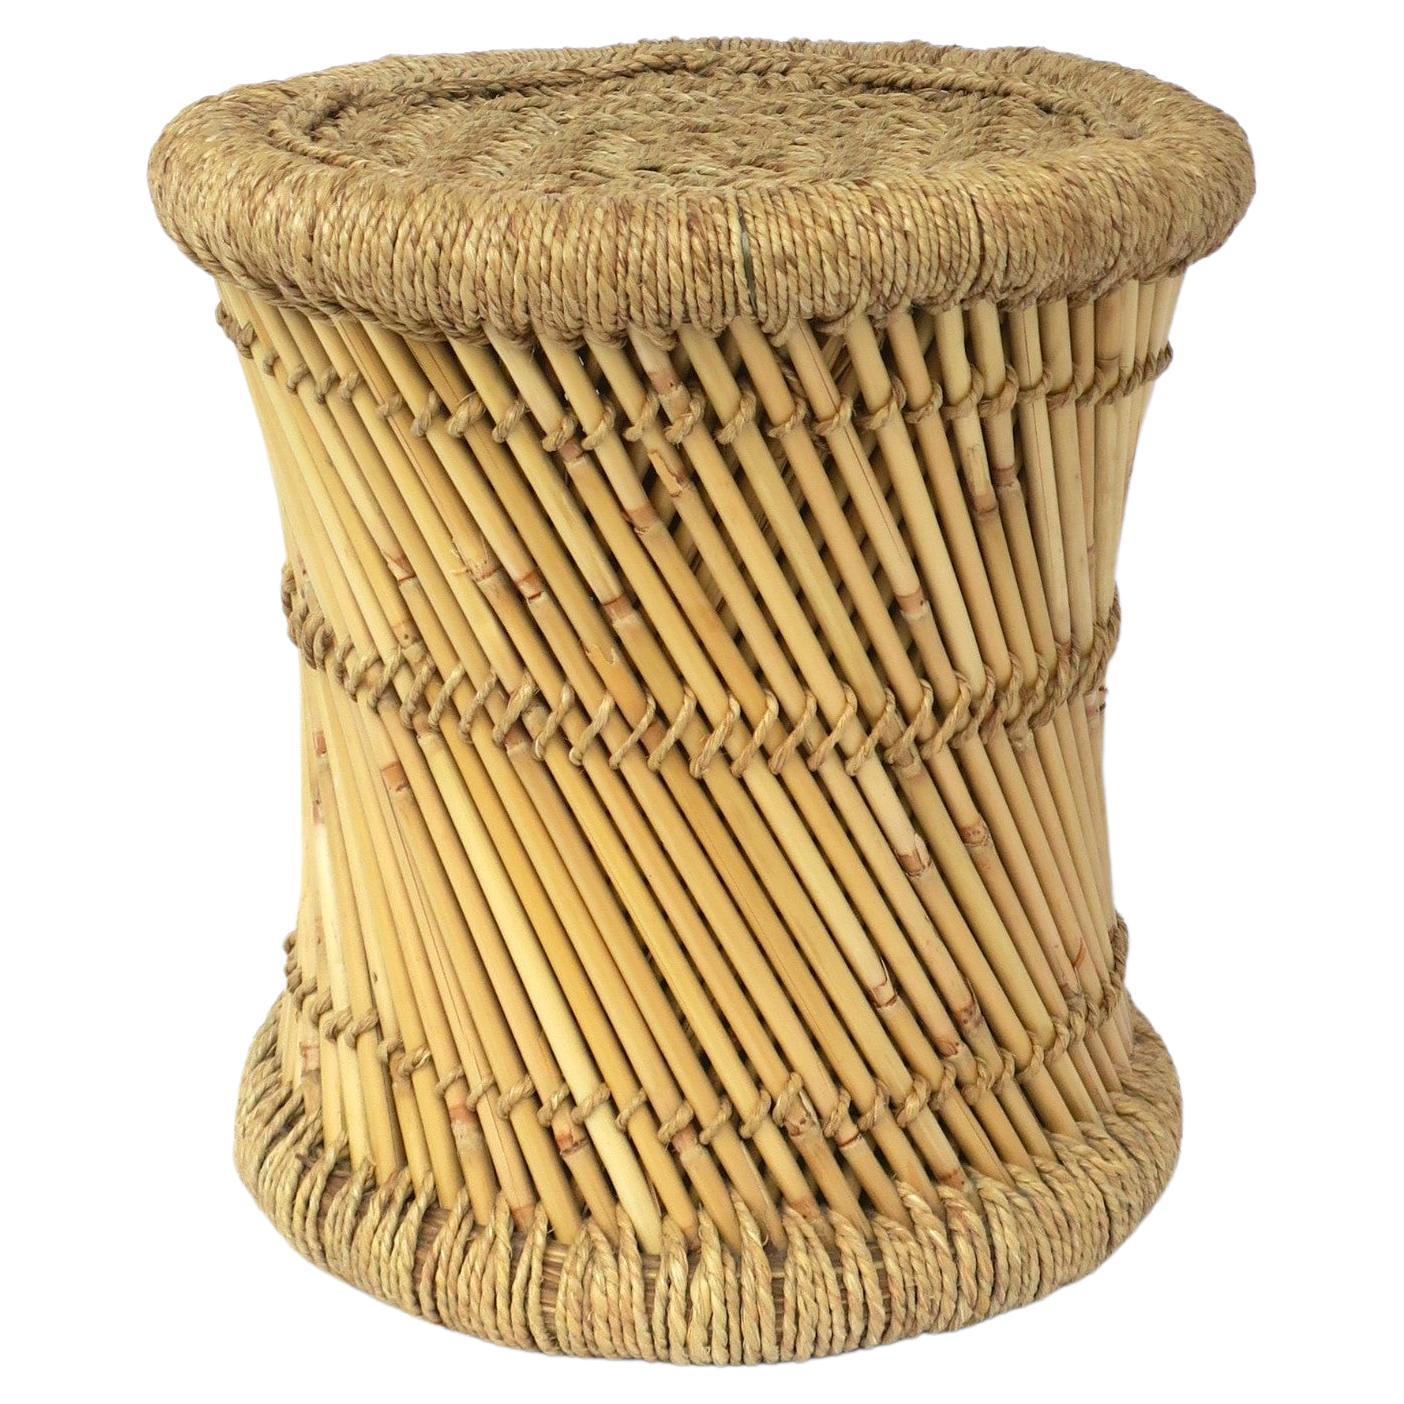 Wicker Reed Stool or Pedestal Drink Table For Sale